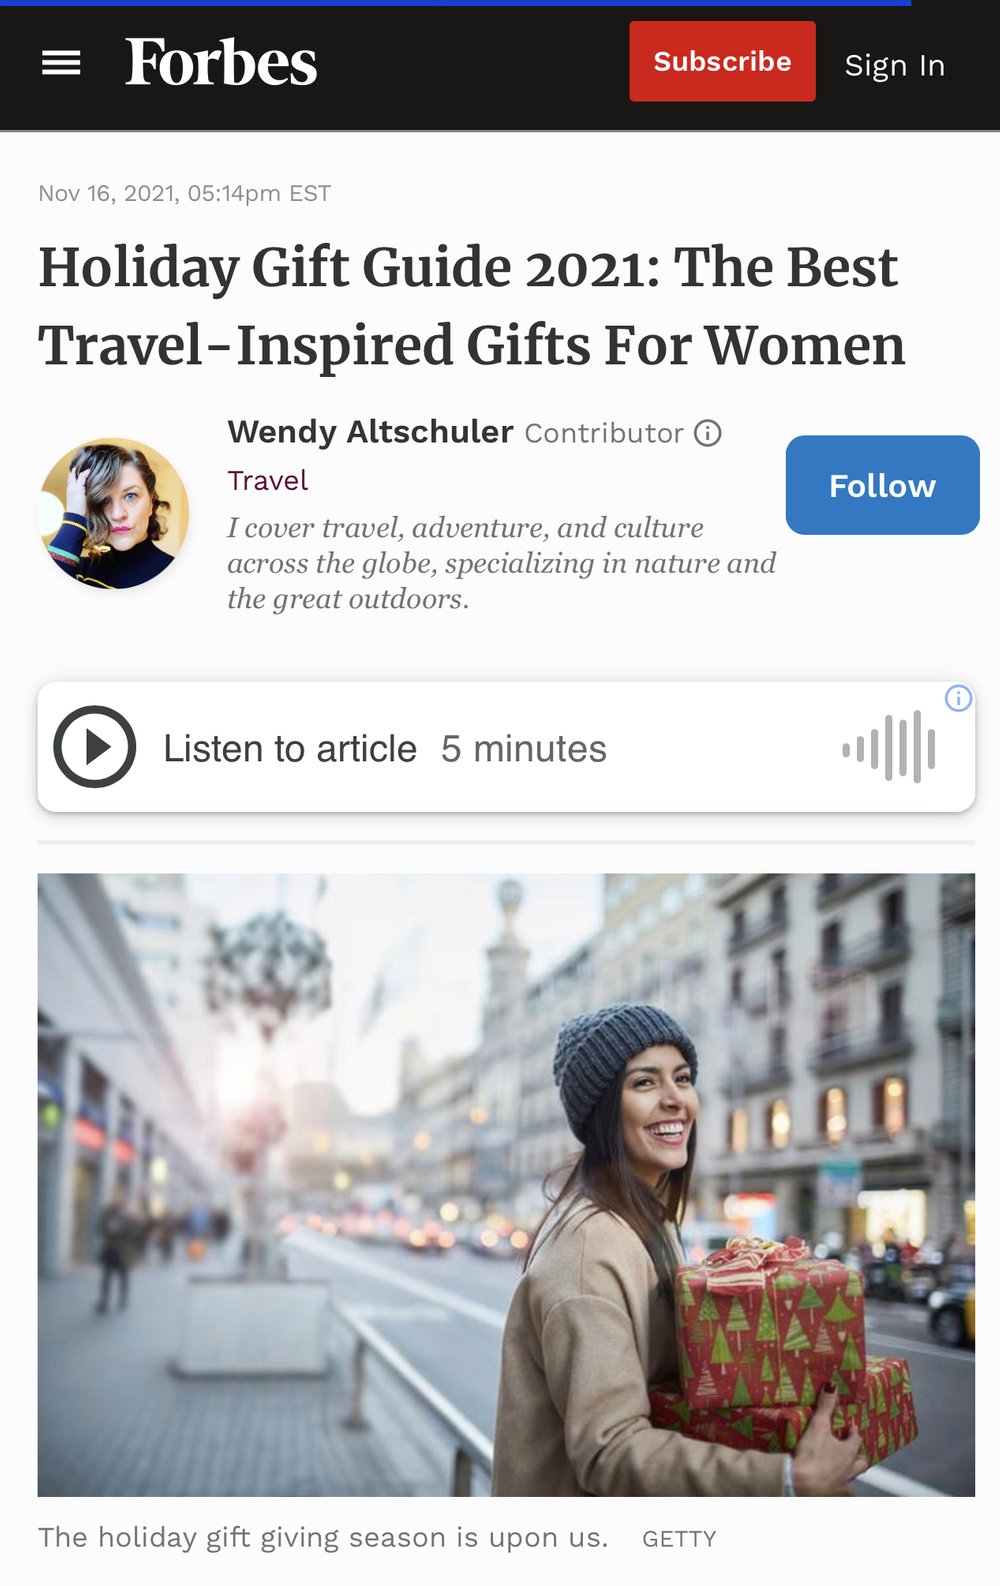 Holiday Gift Guide 2021: The Best Travel-Inspired Gifts For Women